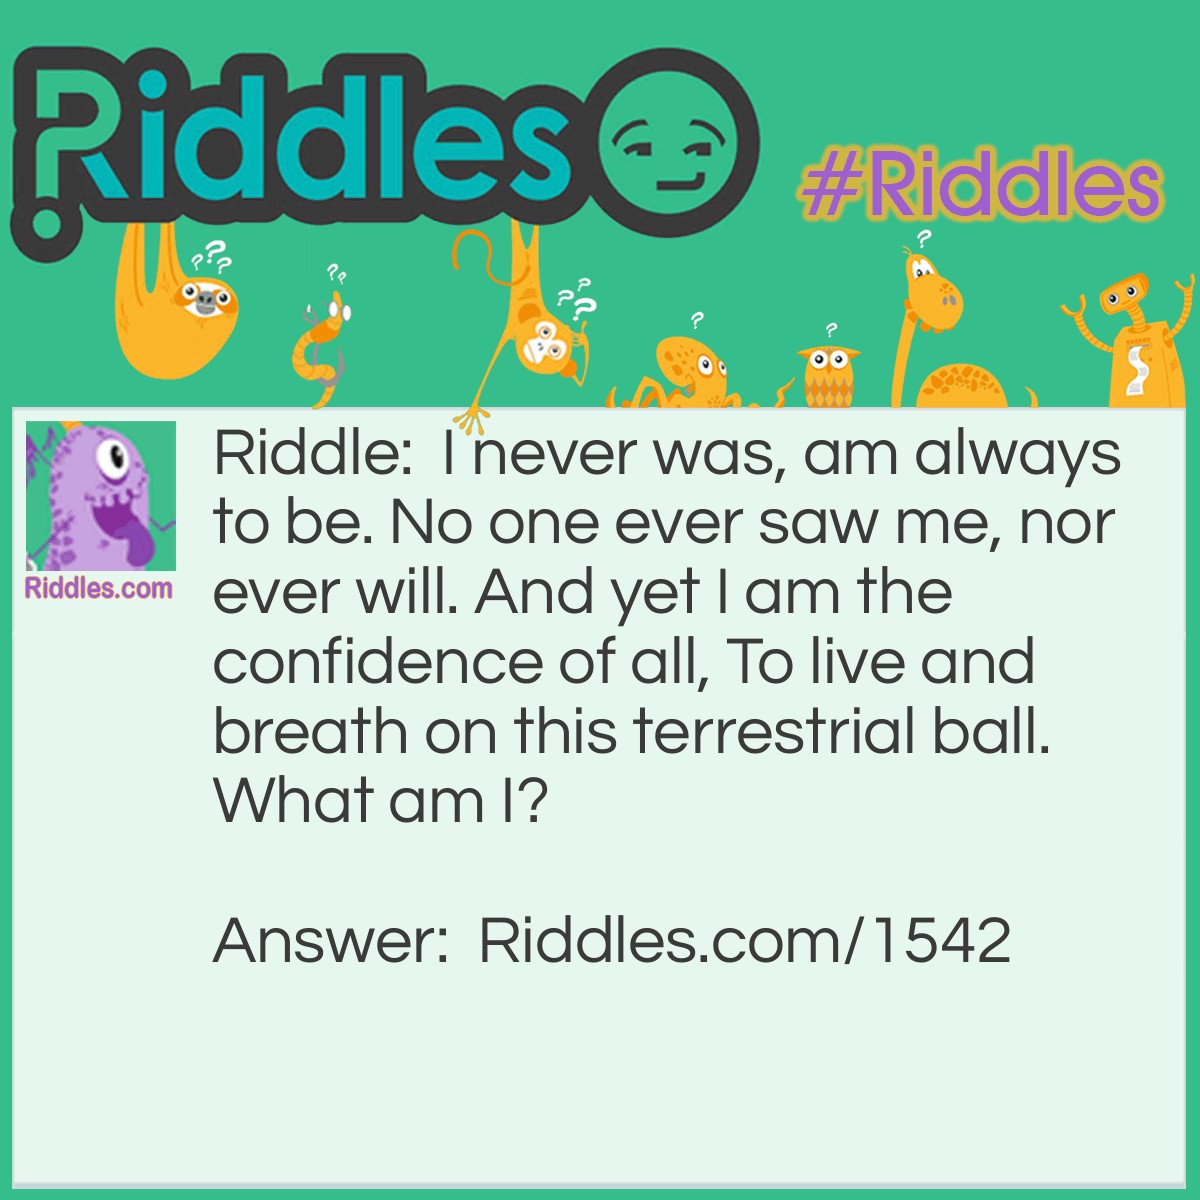 Riddle: I never was, am always to be. No one ever saw me, nor ever will. And yet I am the confidence of all, To live and breath on this terrestrial ball. What am I? Answer: Tomorrow or the future.